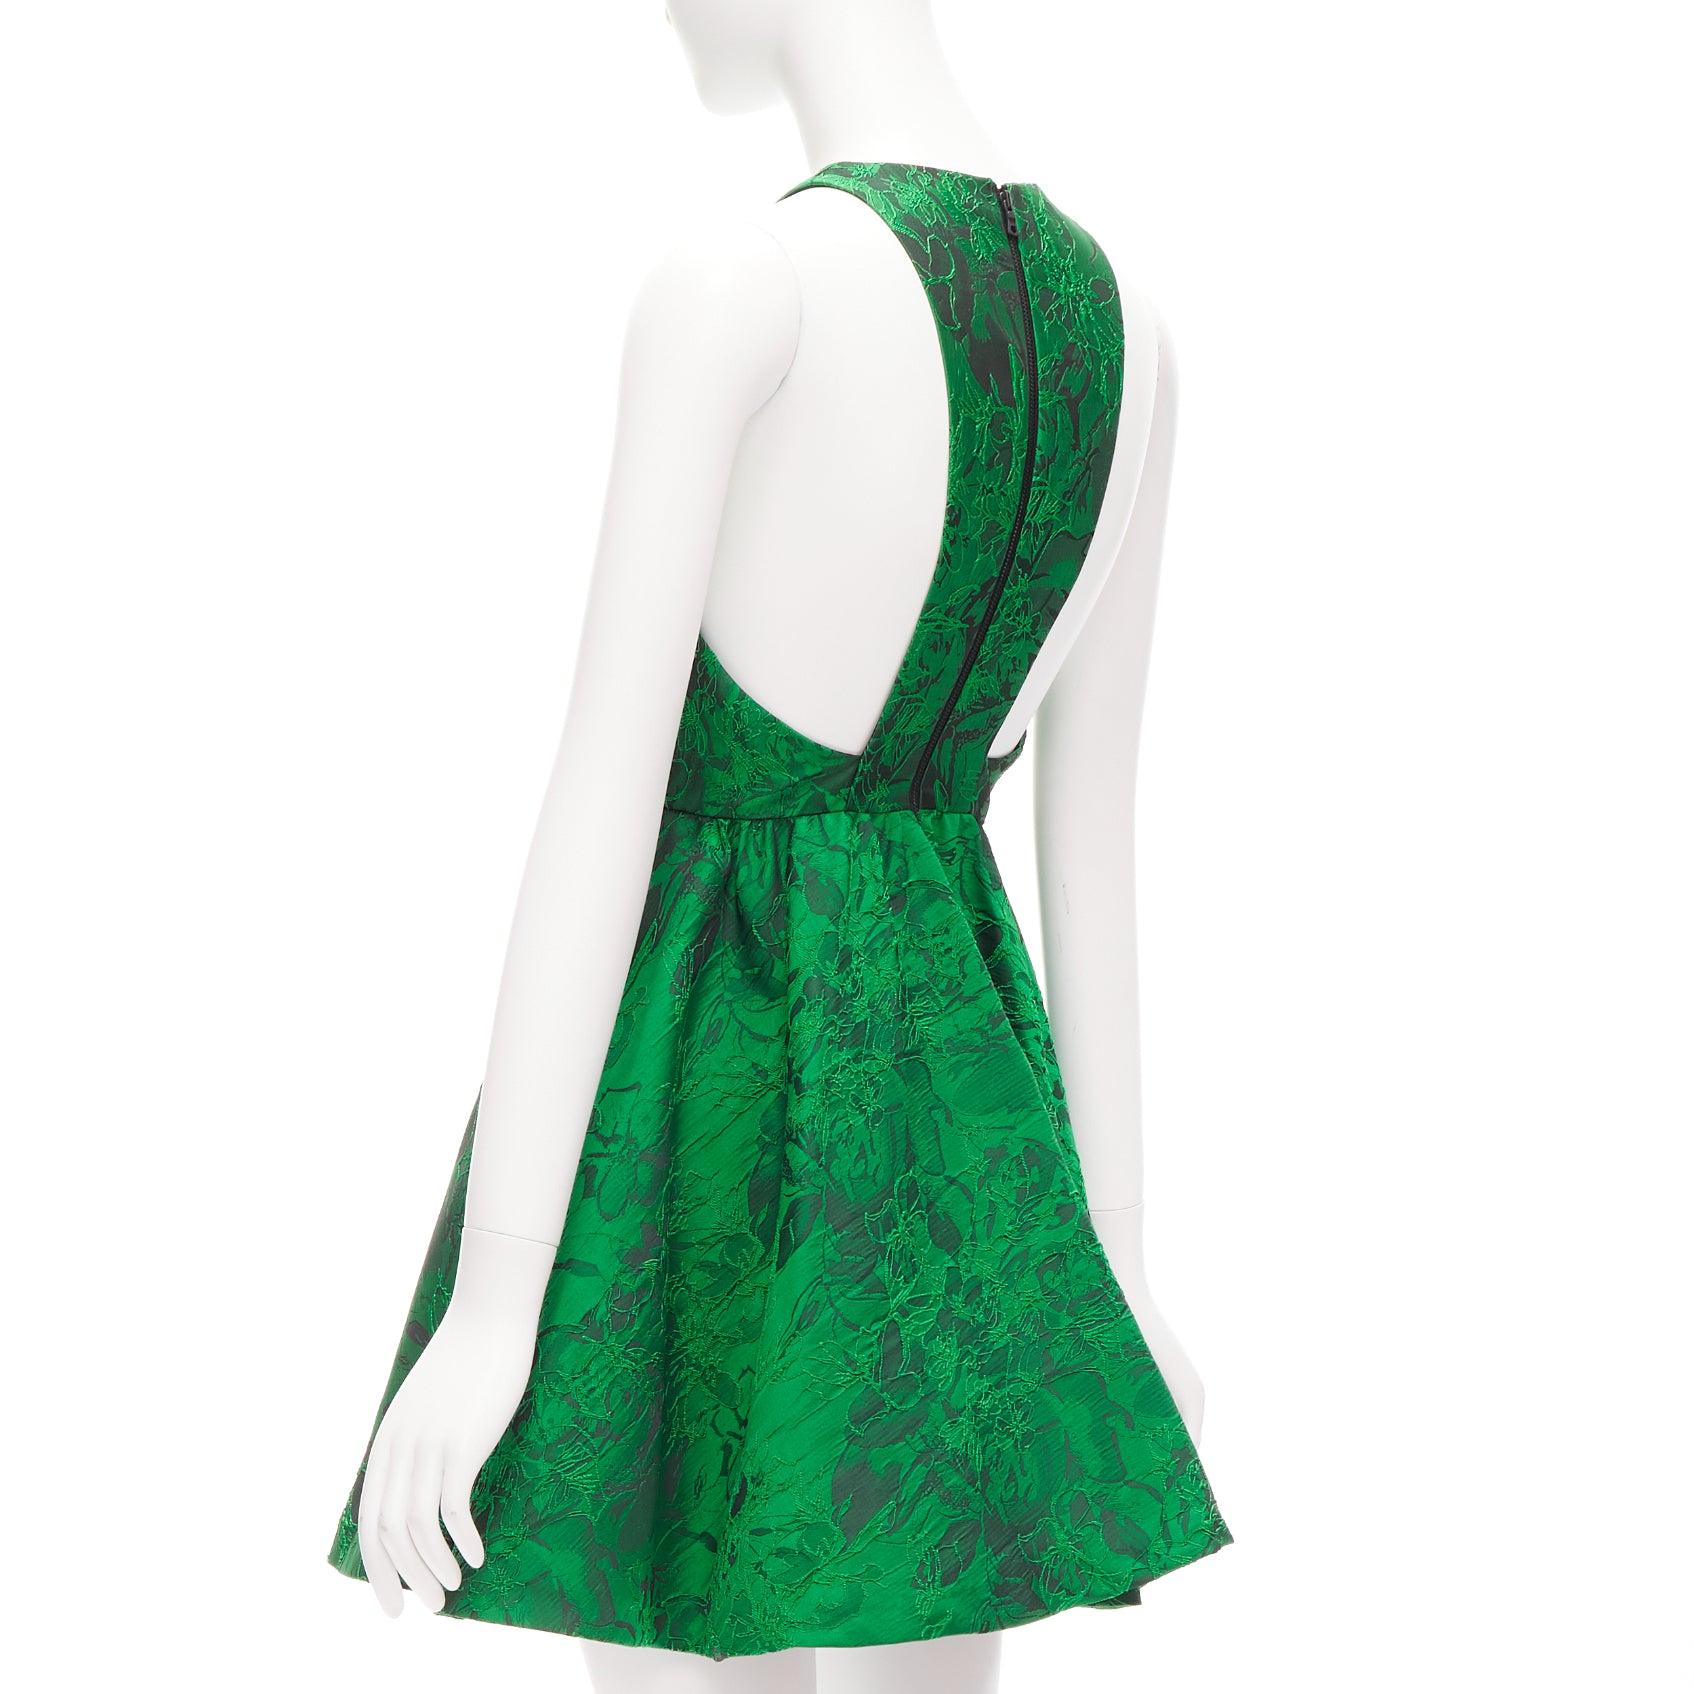 Women's ALICE OLIVIA Tevin green lace jacquard sleeveless flared cocktail dress US0 XS